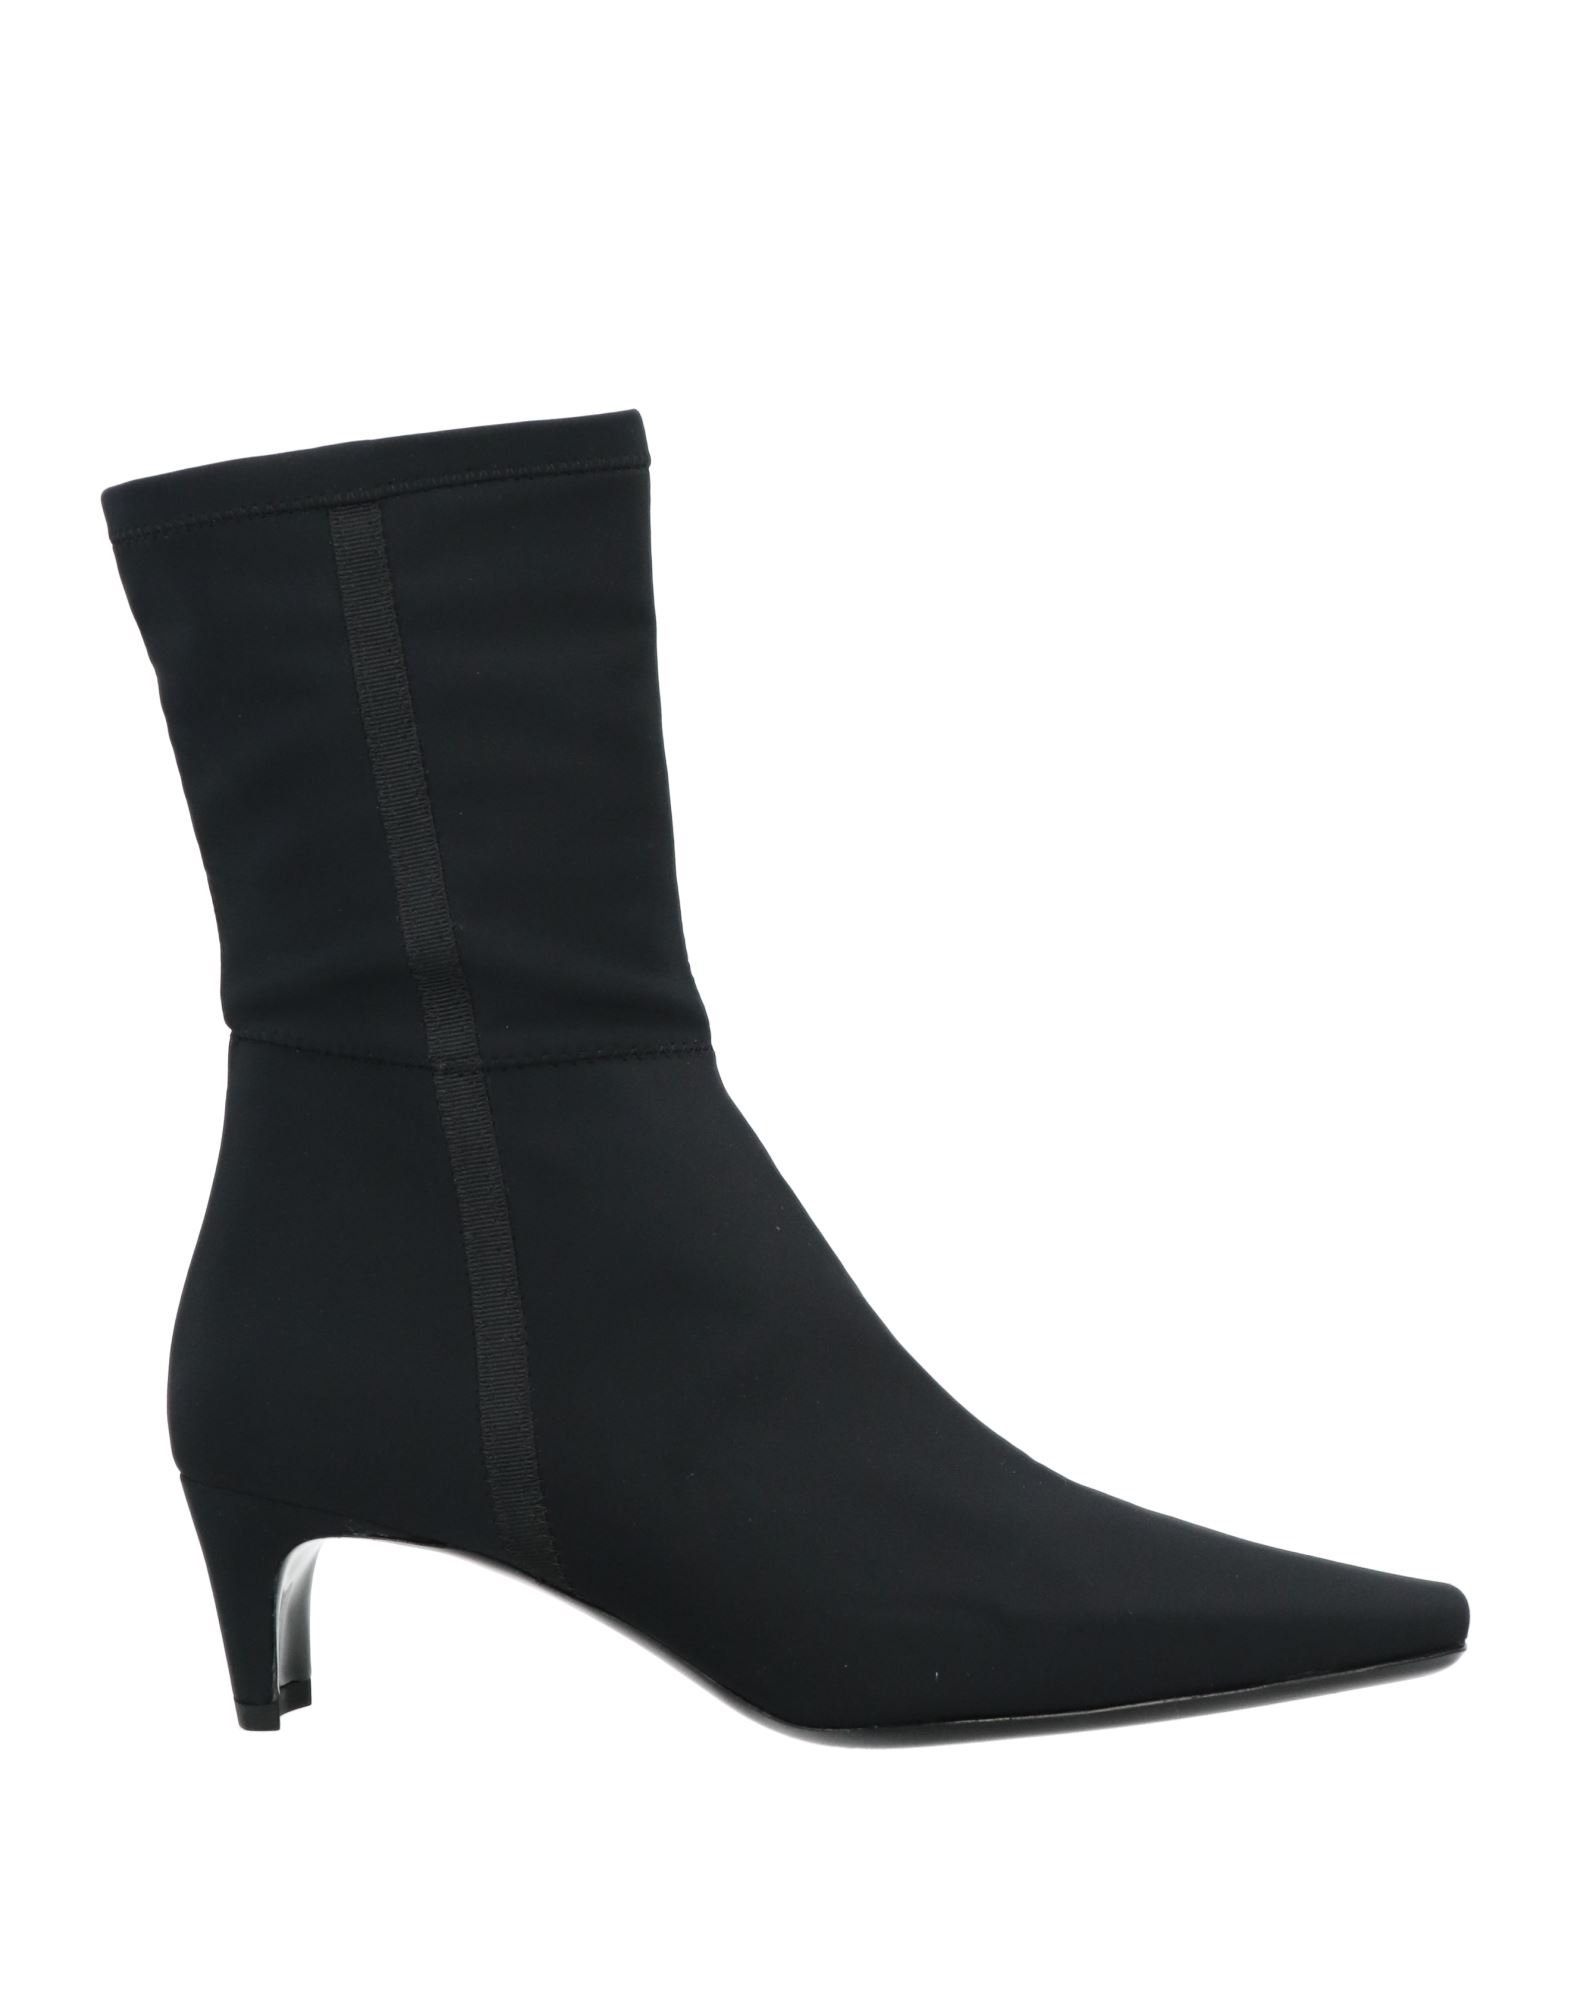 STAUD ANKLE BOOTS